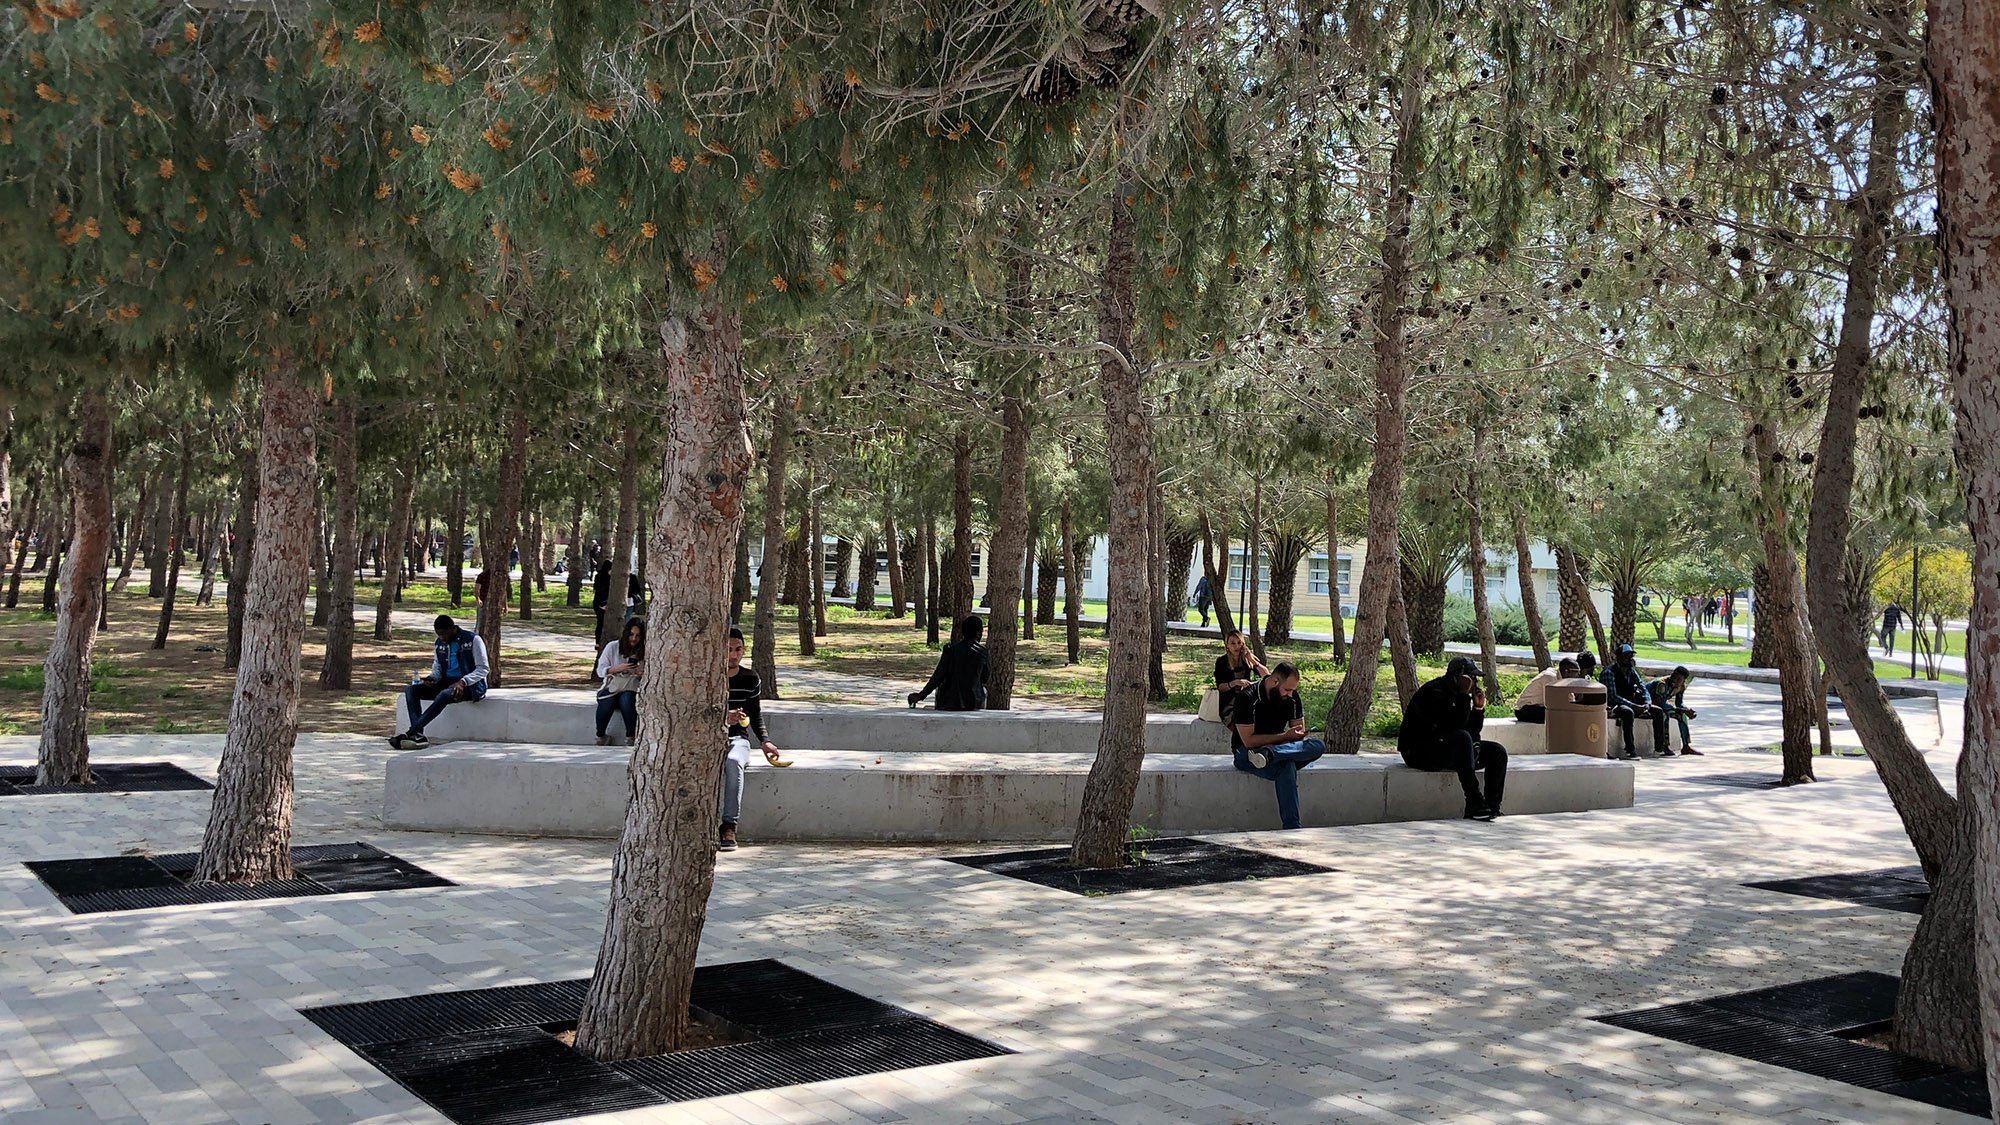 Tree lined paths provide continuous shade during summer and partial shade during winter, creating open spaces where students are likely to gather.